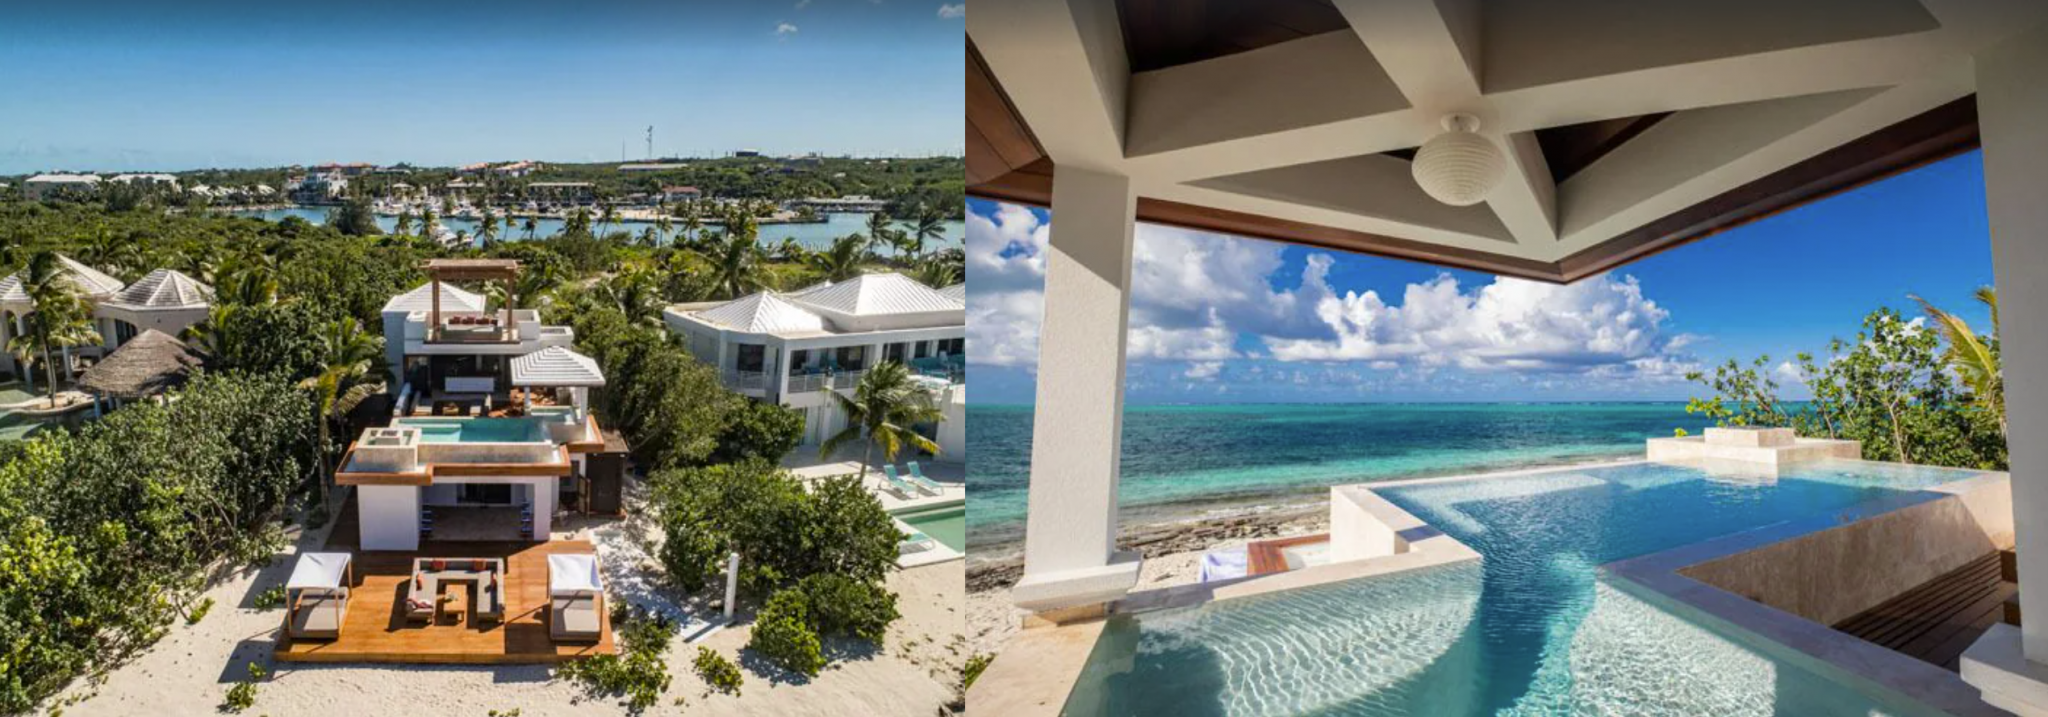 Two side-by-side images of a Turks and Caicos villa. The image on the left is an aerial landscape view, showing the full villa property and surrounding area. The image on the left shows the view from inside the villa's infinity pool, looking out over the ocean.